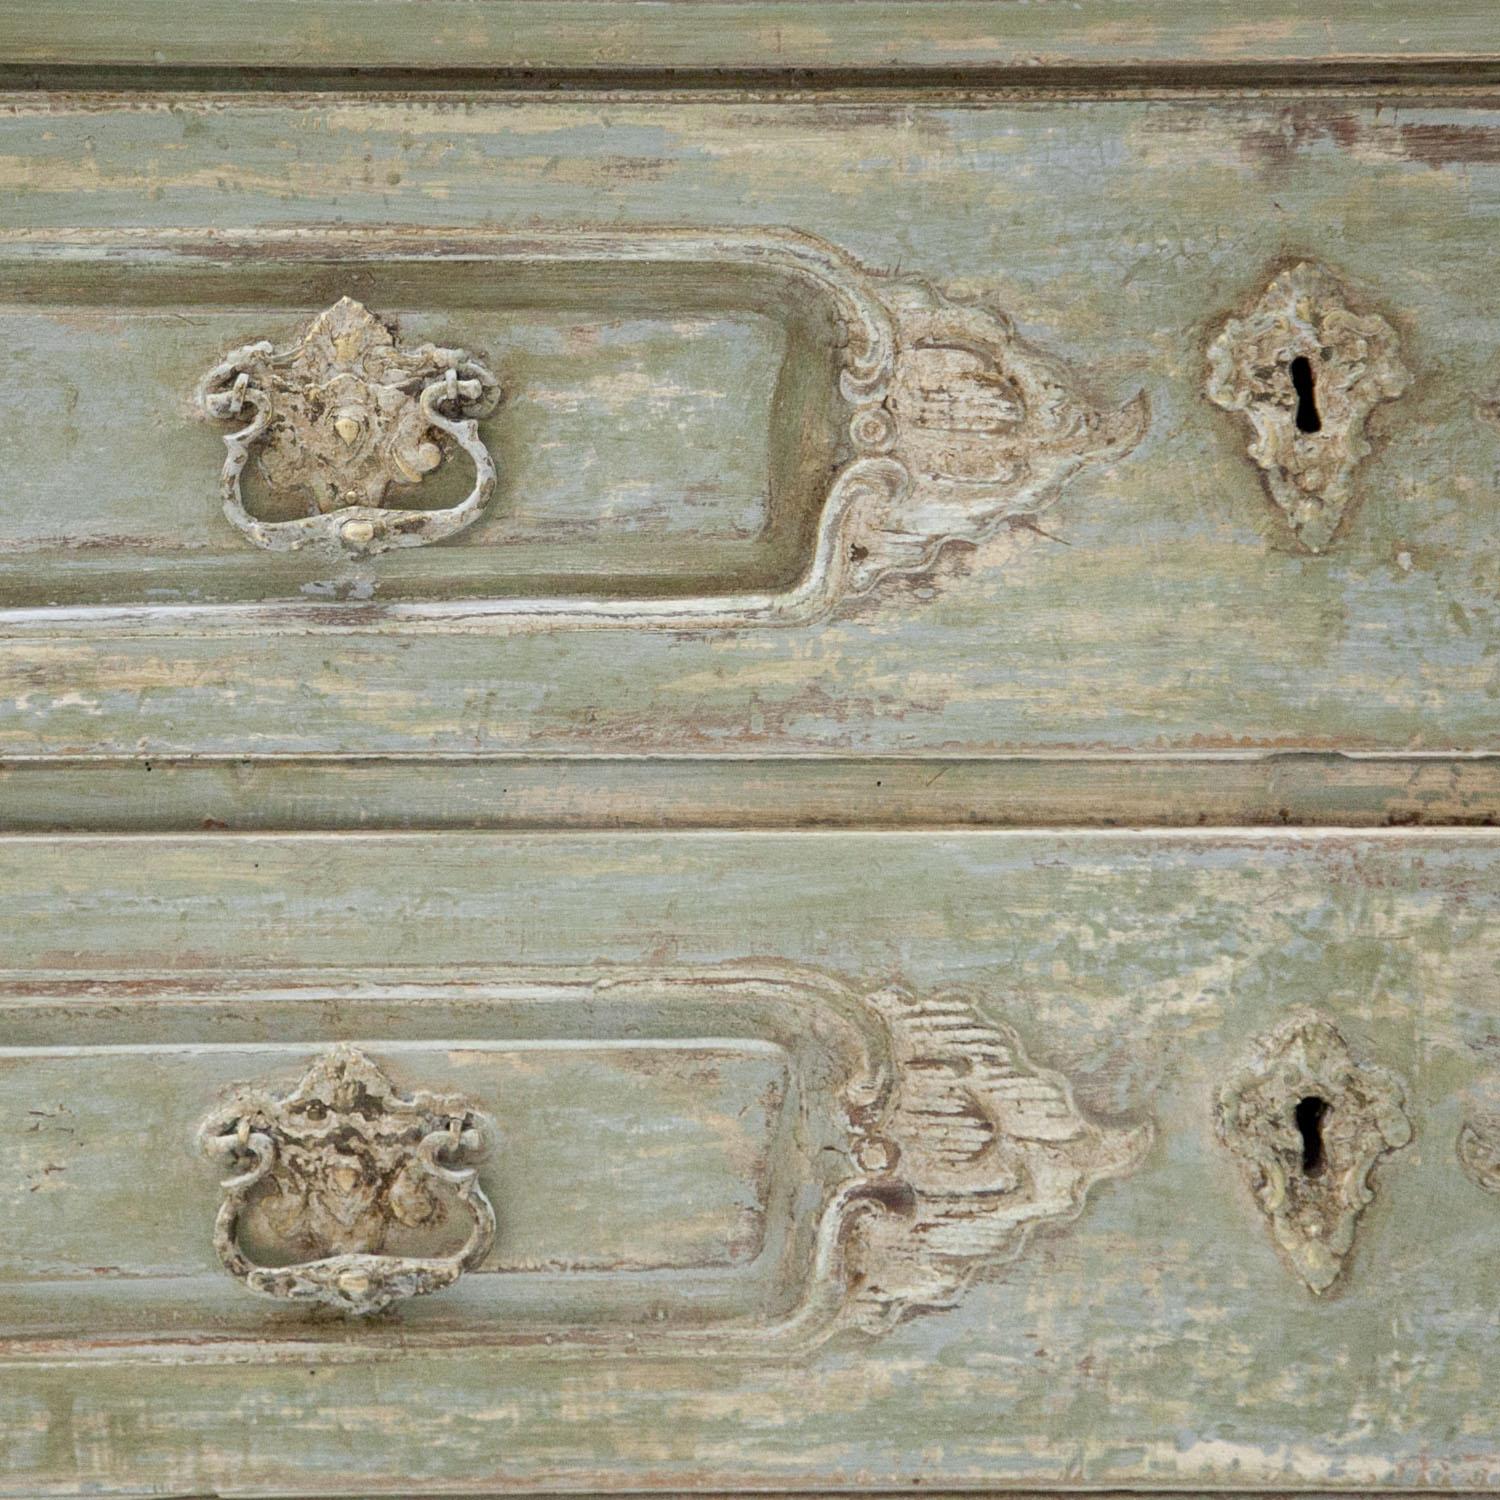 Baroque Chest of Drawers, 18th Century (Holz)